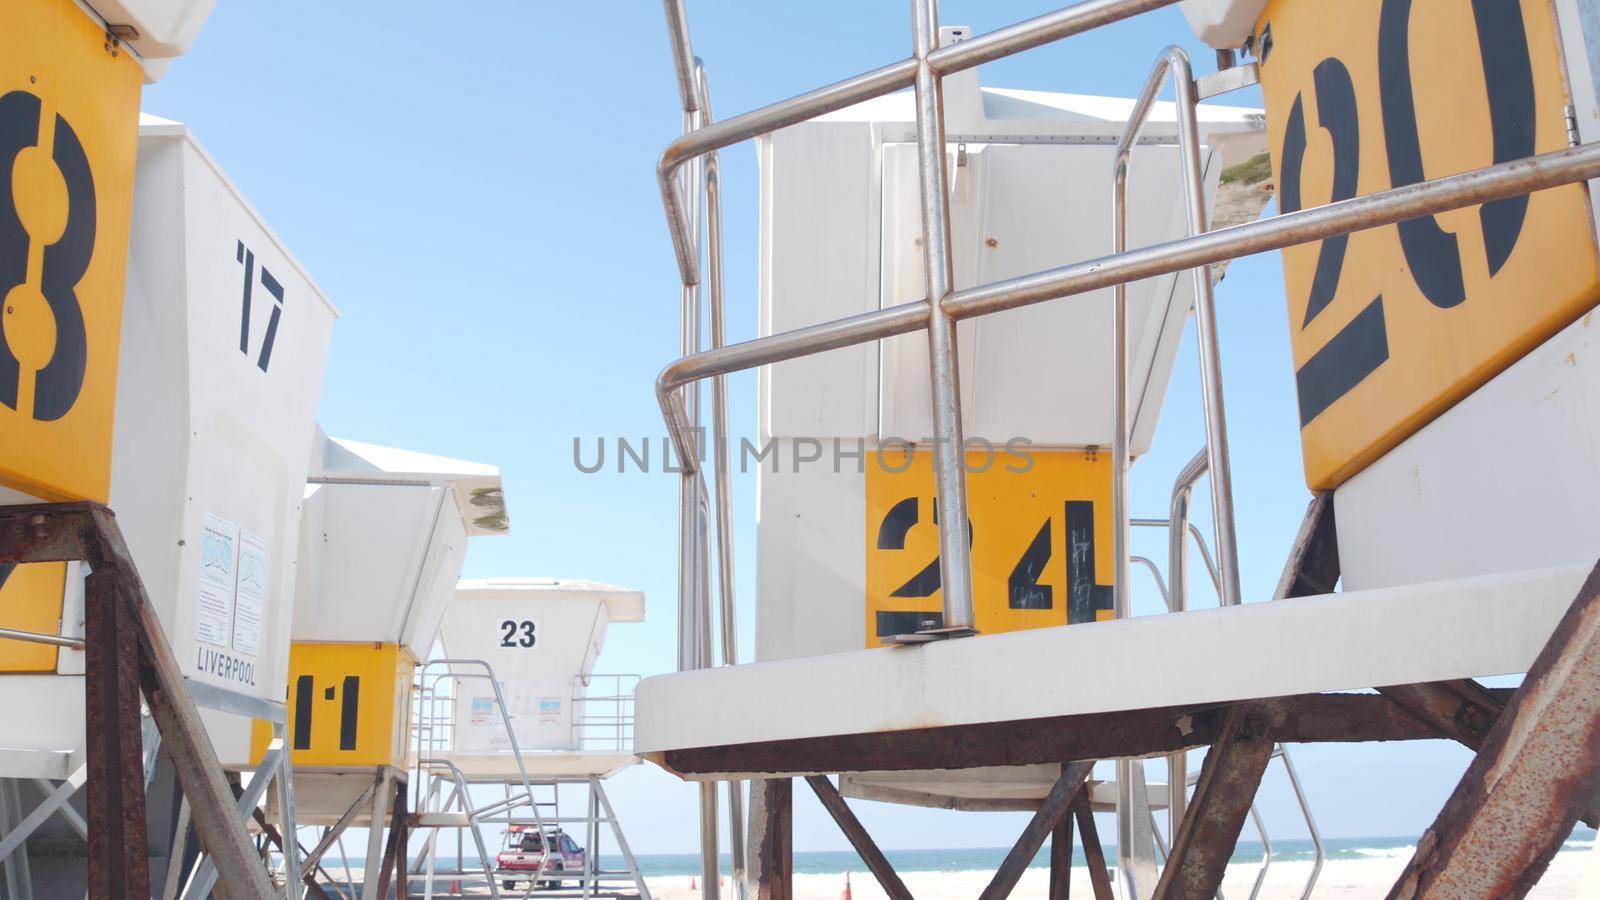 Lifeguard stand or life guard tower for surfing, California ocean beach, USA. by DogoraSun